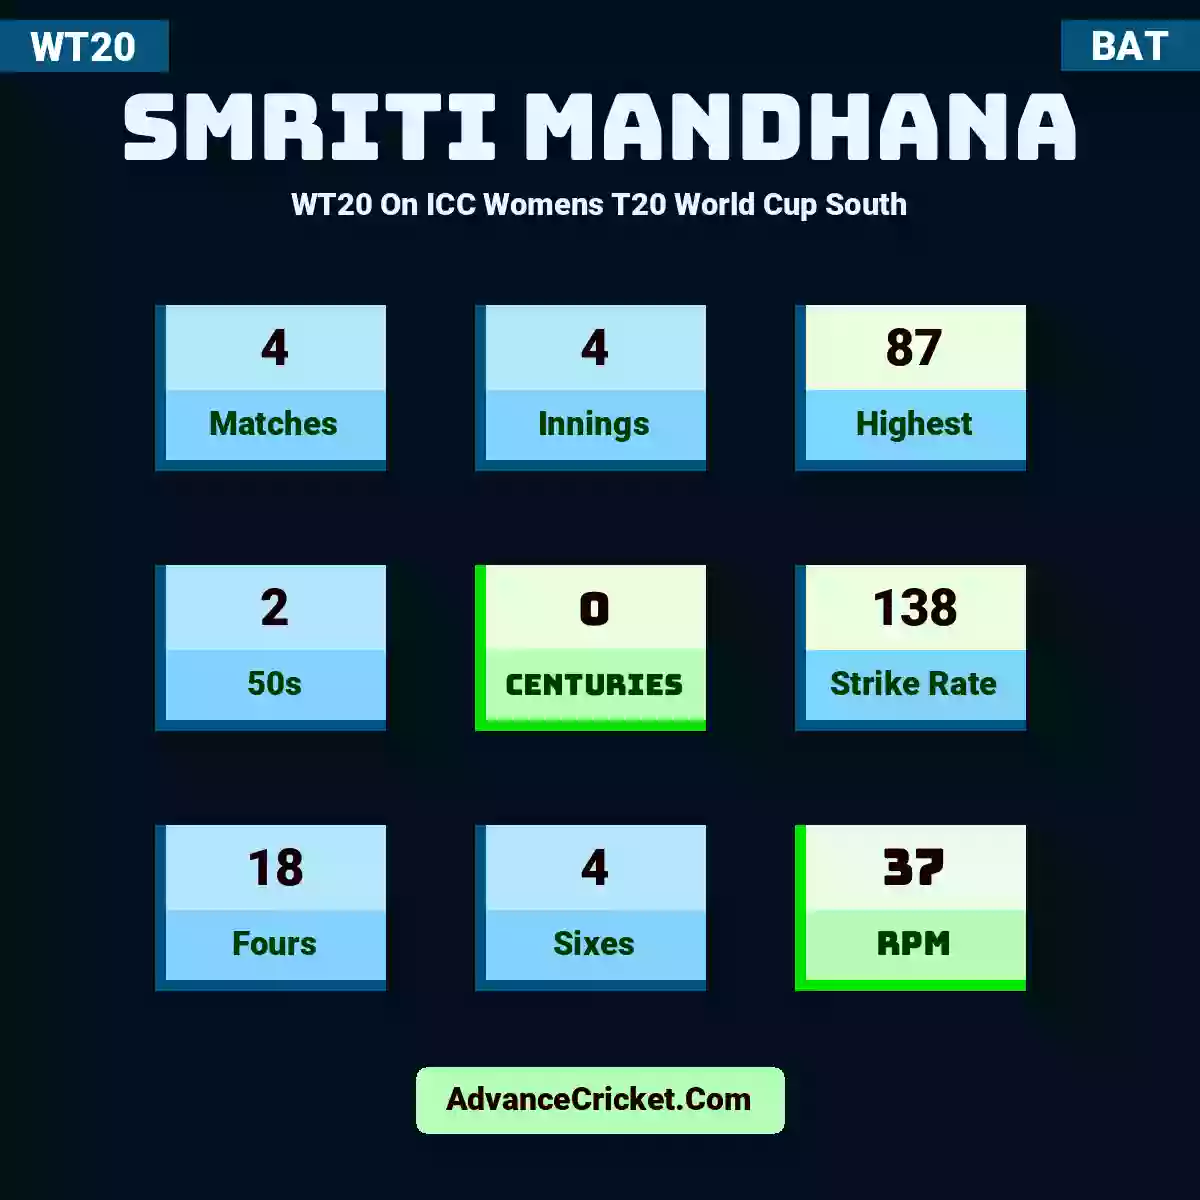 Smriti Mandhana WT20  On ICC Womens T20 World Cup South, Smriti Mandhana played 4 matches, scored 87 runs as highest, 2 half-centuries, and 0 centuries, with a strike rate of 138. S.Mandhana hit 18 fours and 4 sixes, with an RPM of 37.